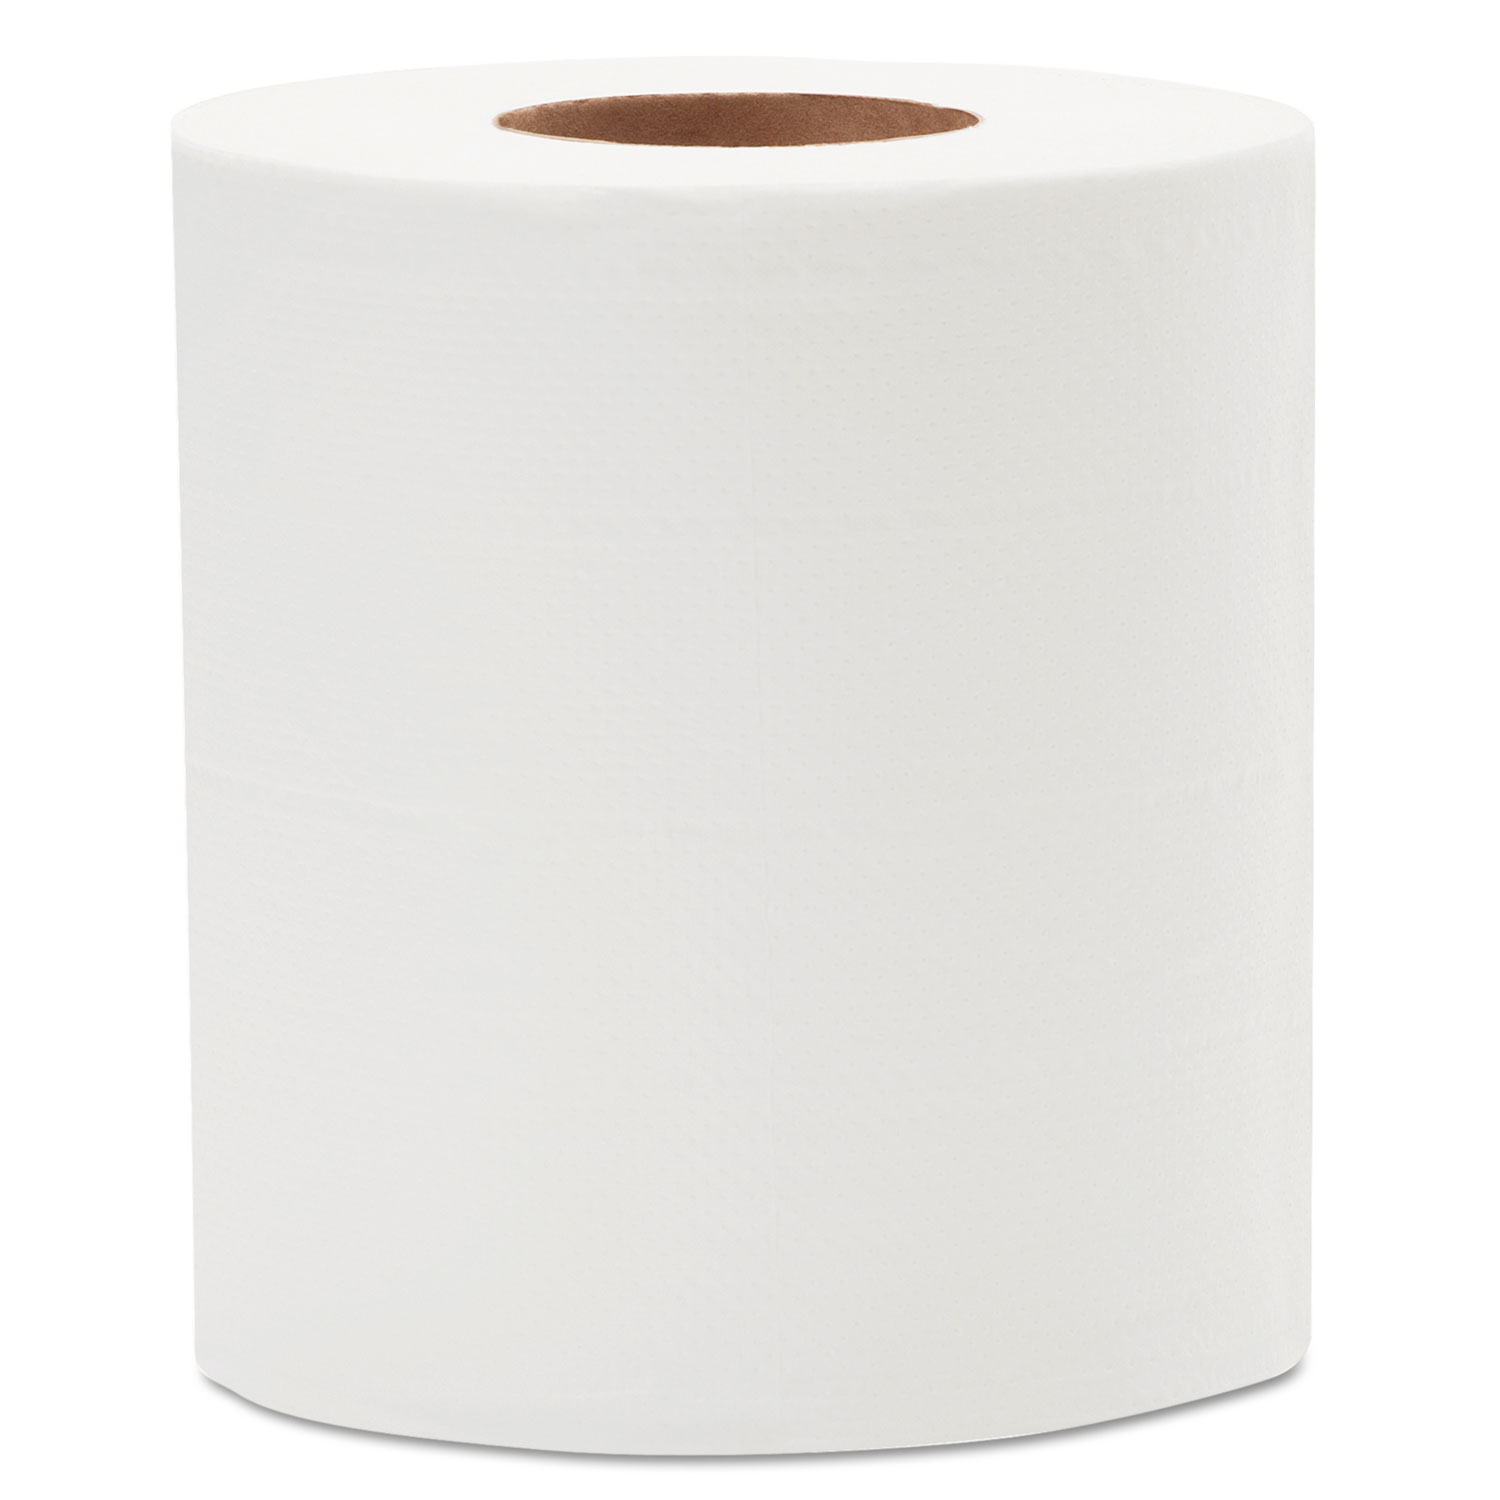 Windsor Place Center Pull Towels, 2-Ply, 8 x 9, White, 500/Roll, 6/Carton